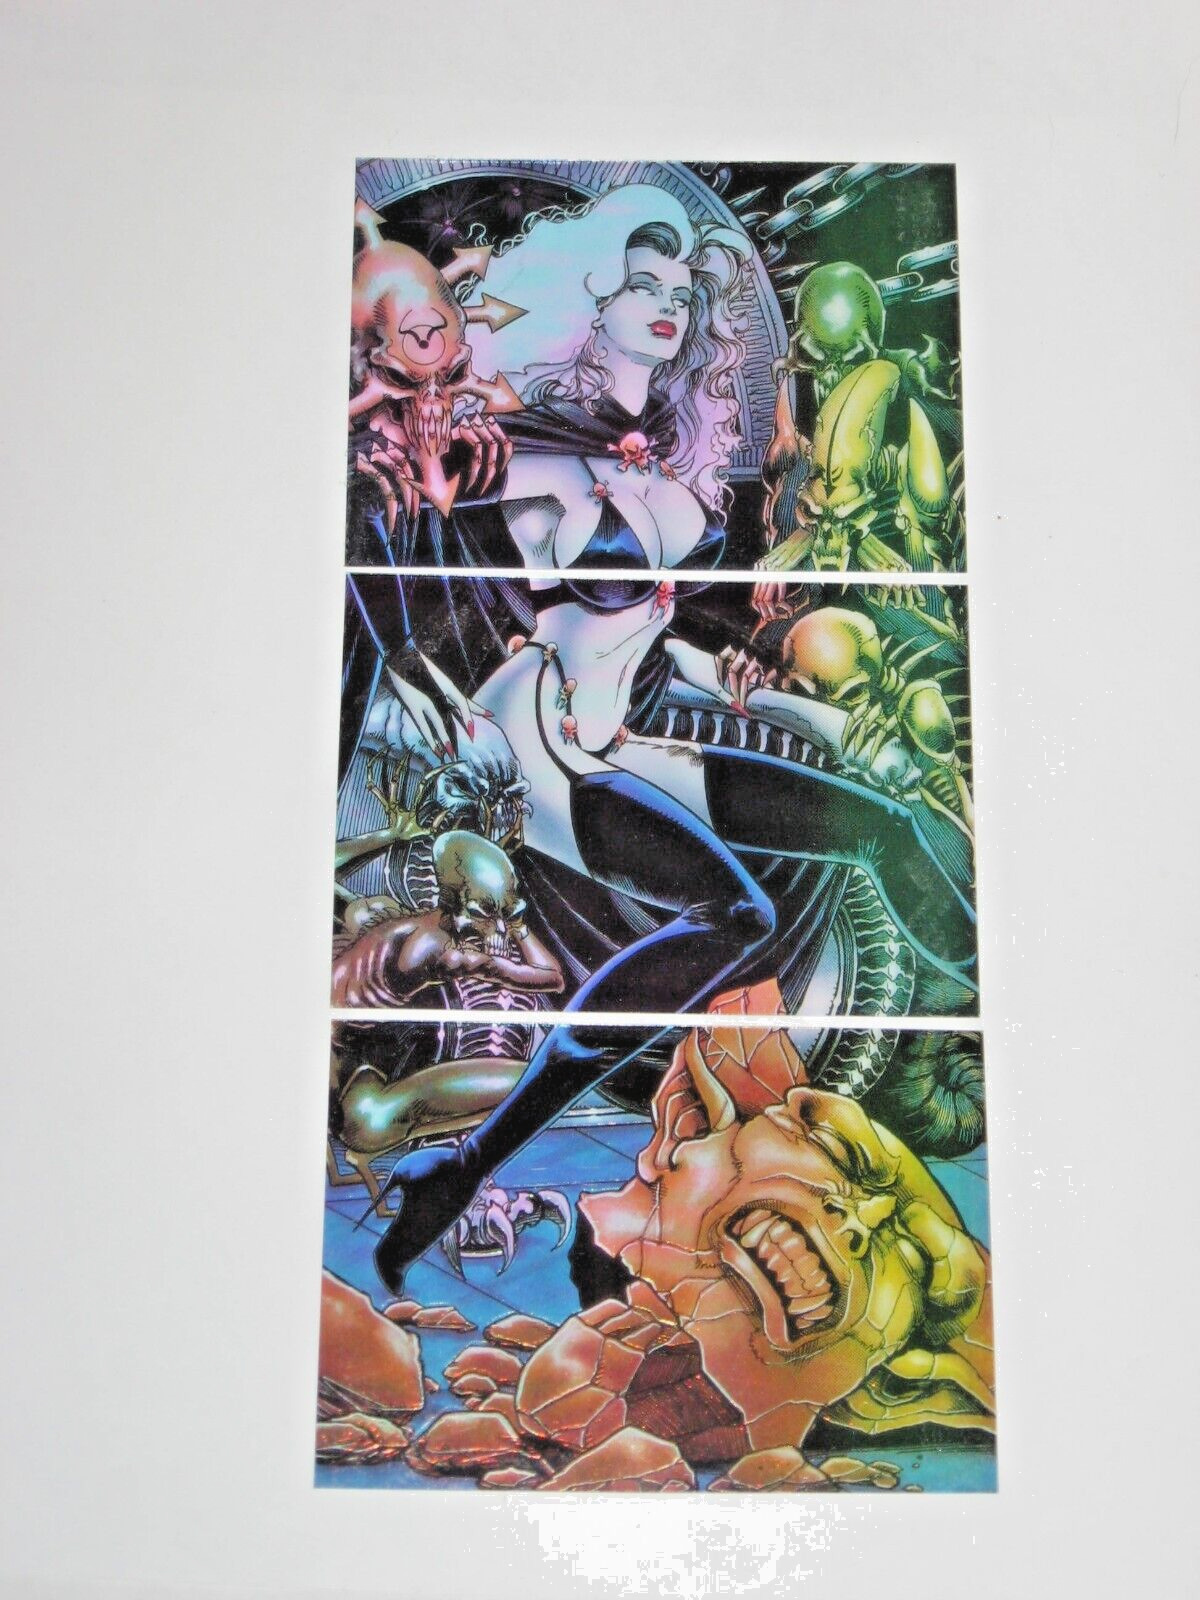 1995 LADY DEATH ALL-CHROMIUM SERIES 2 INSERT CLEARCHROME TRYPTIC 3 Card Set